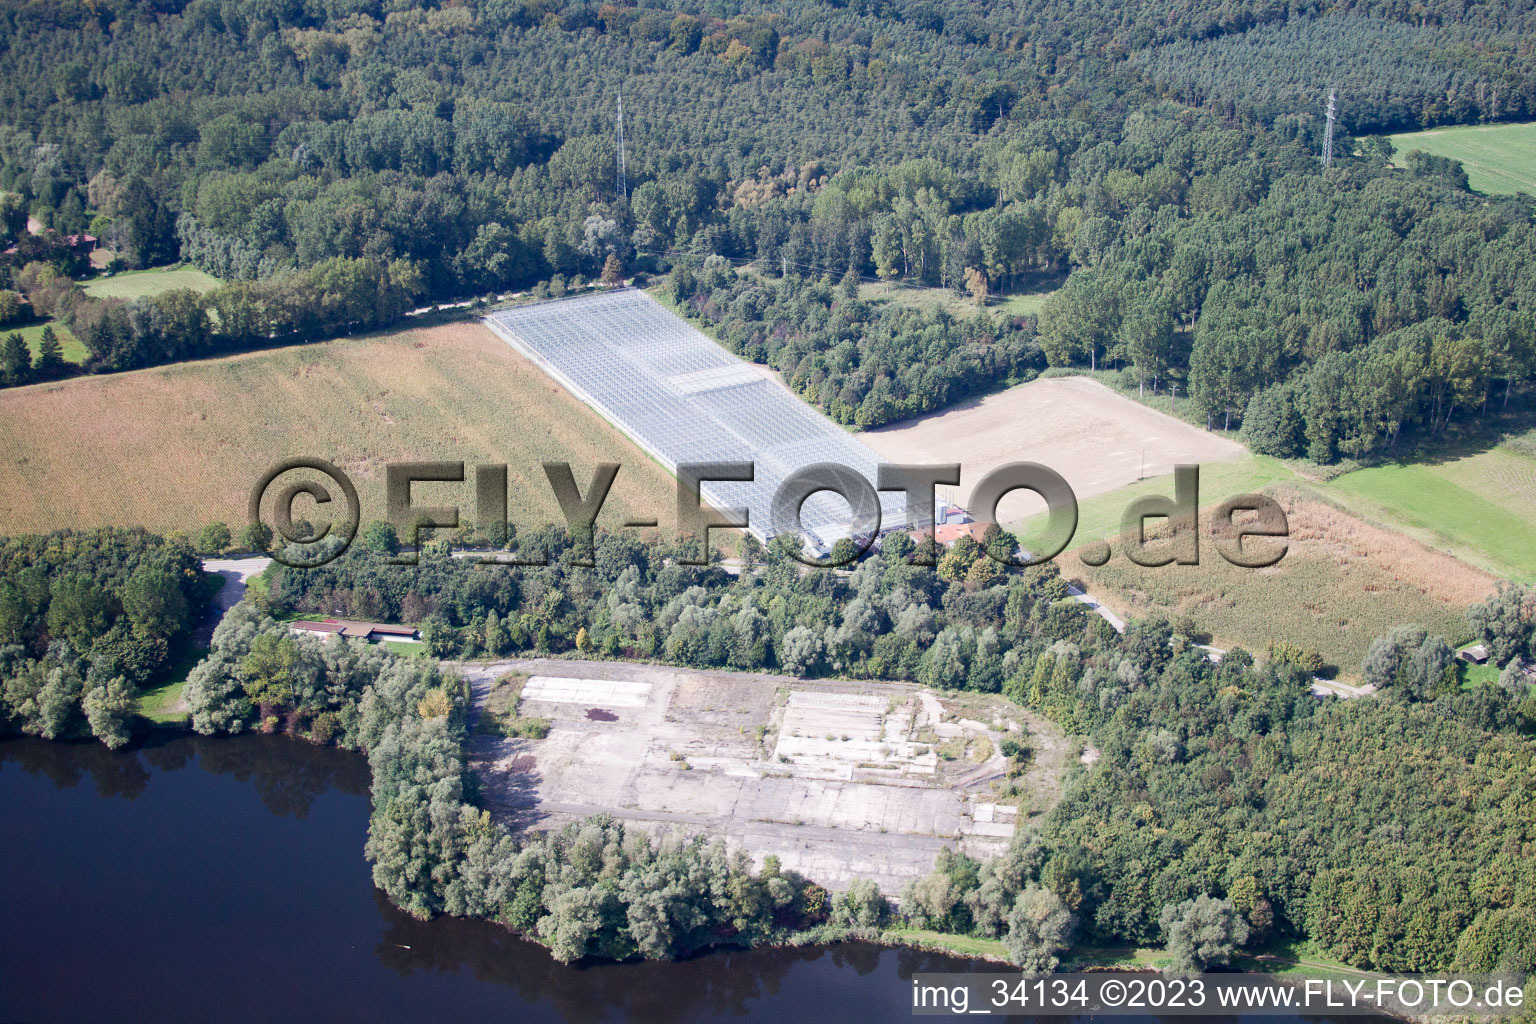 Aerial photograpy of Klaus and Frank Mildenberger nursery in the district Sondernheim in Germersheim in the state Rhineland-Palatinate, Germany